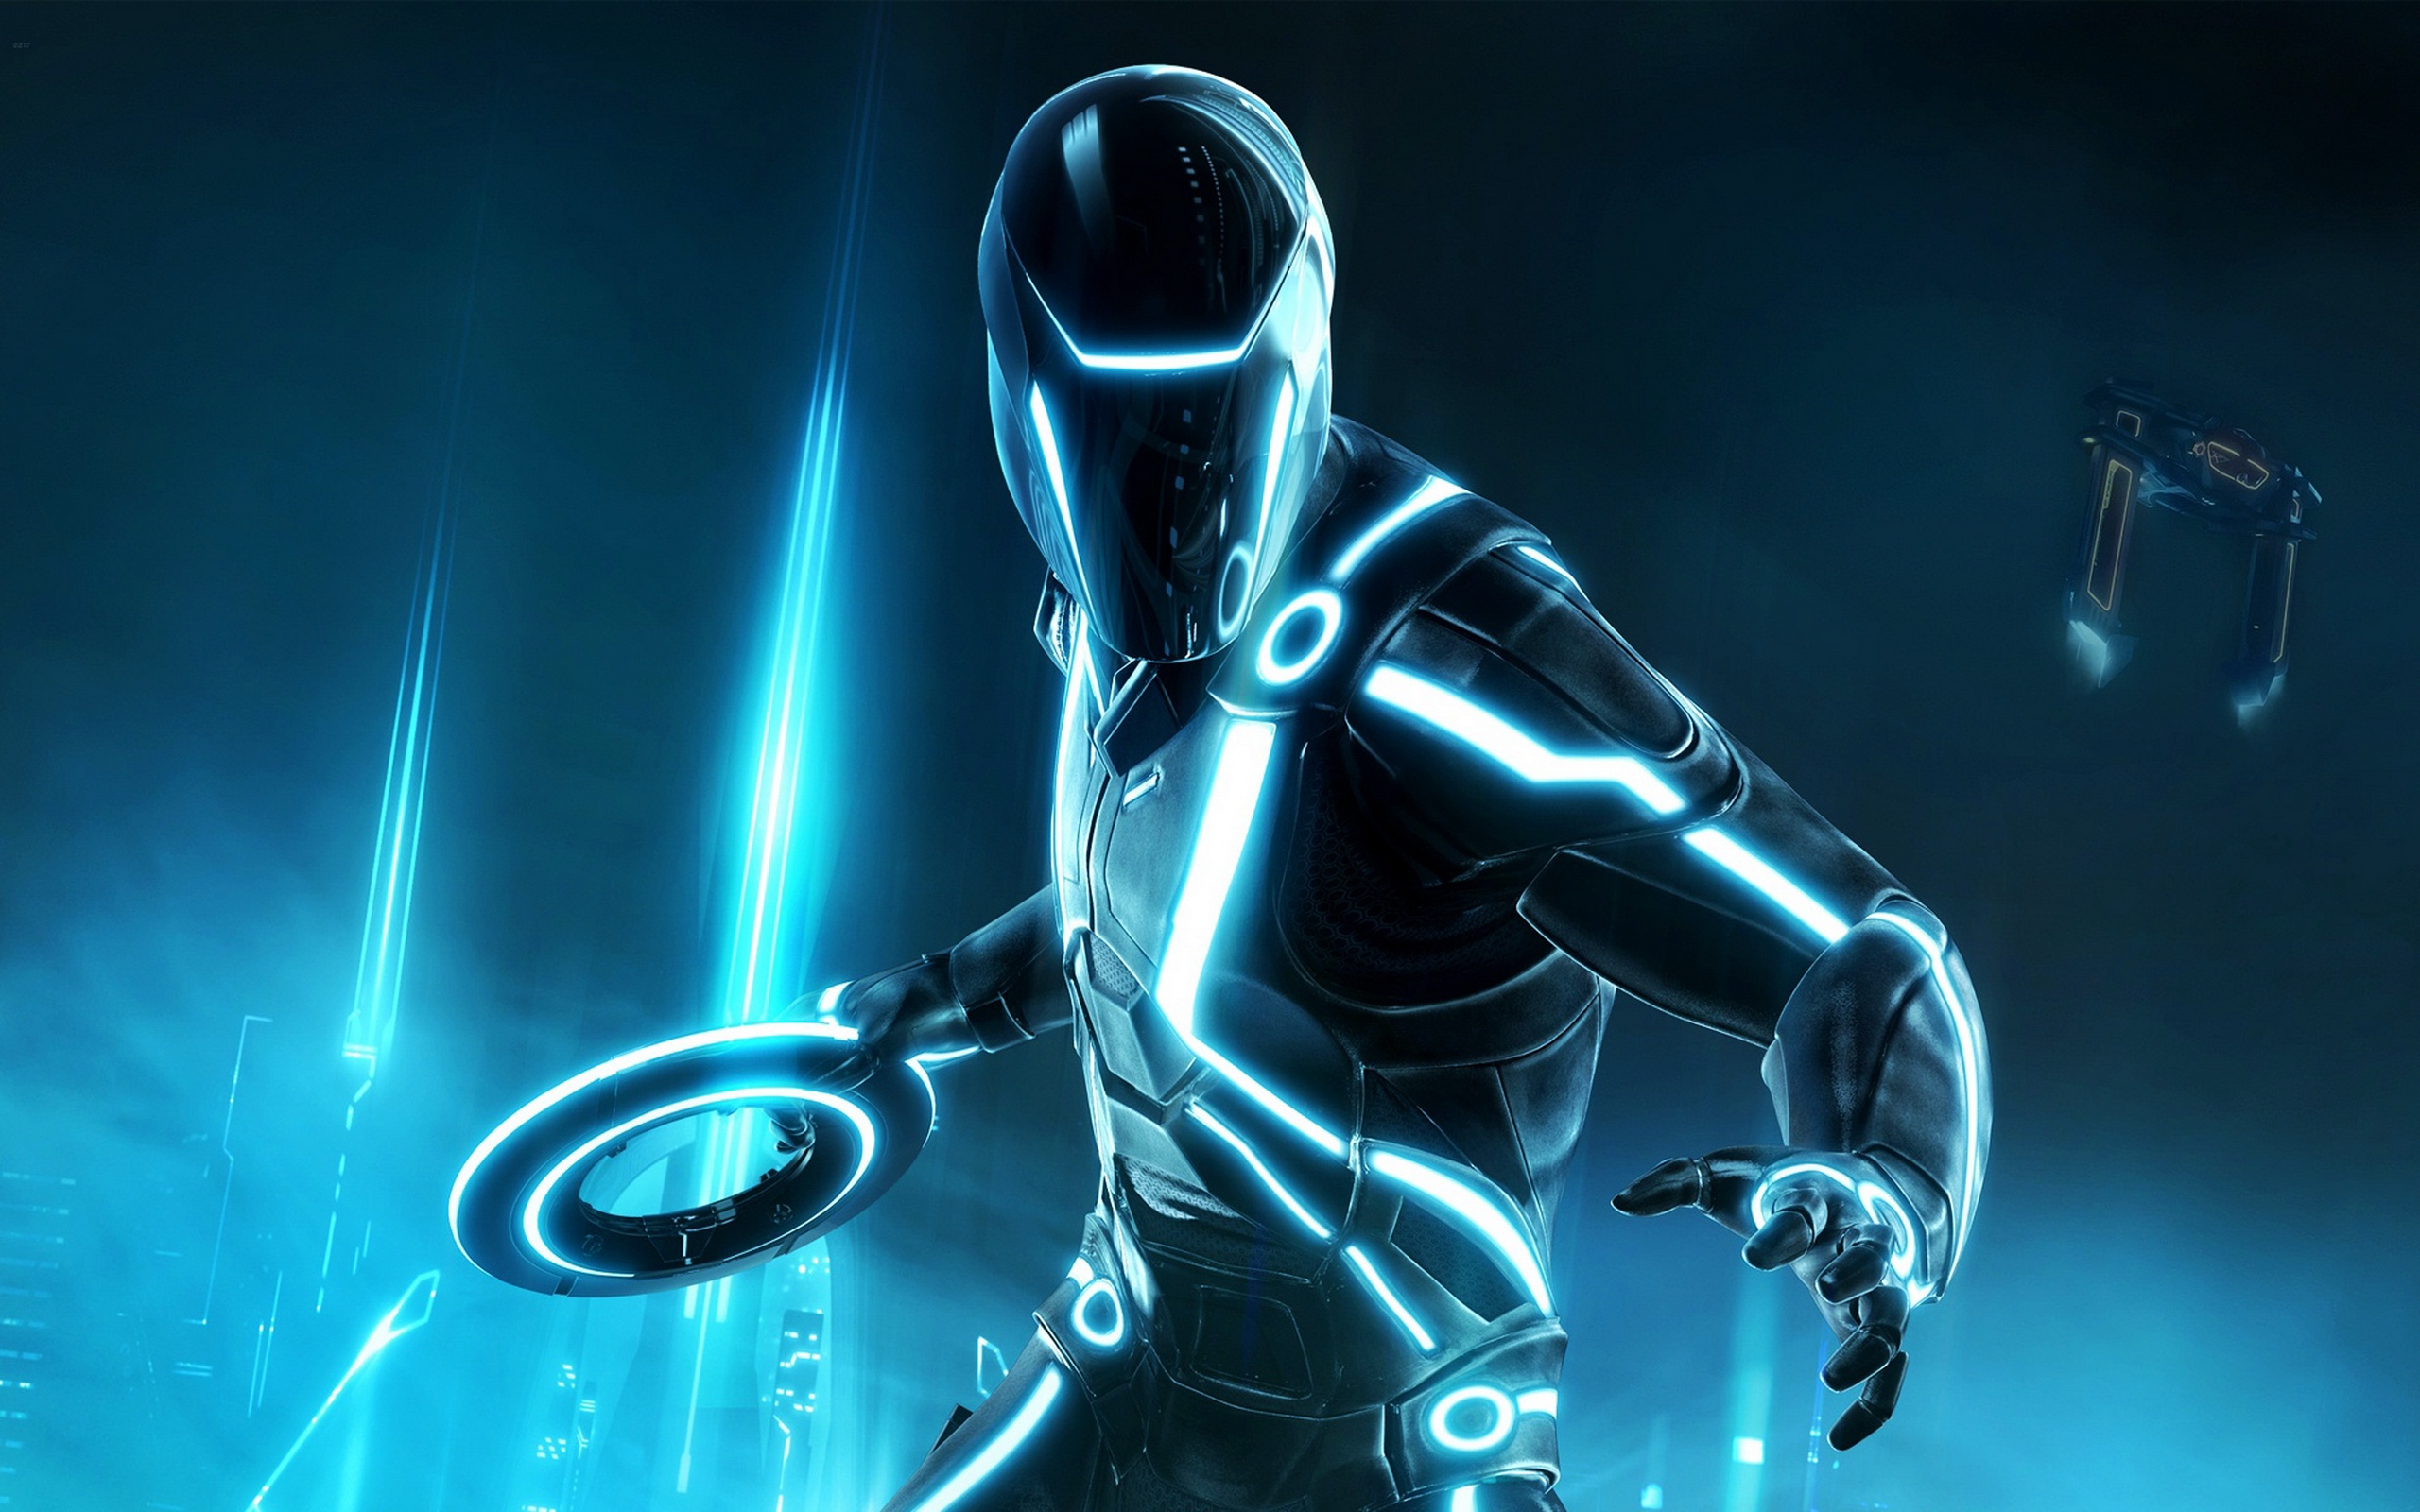 tron legacy wallpaper,graphic design,fictional character,cg artwork,animation,graphics